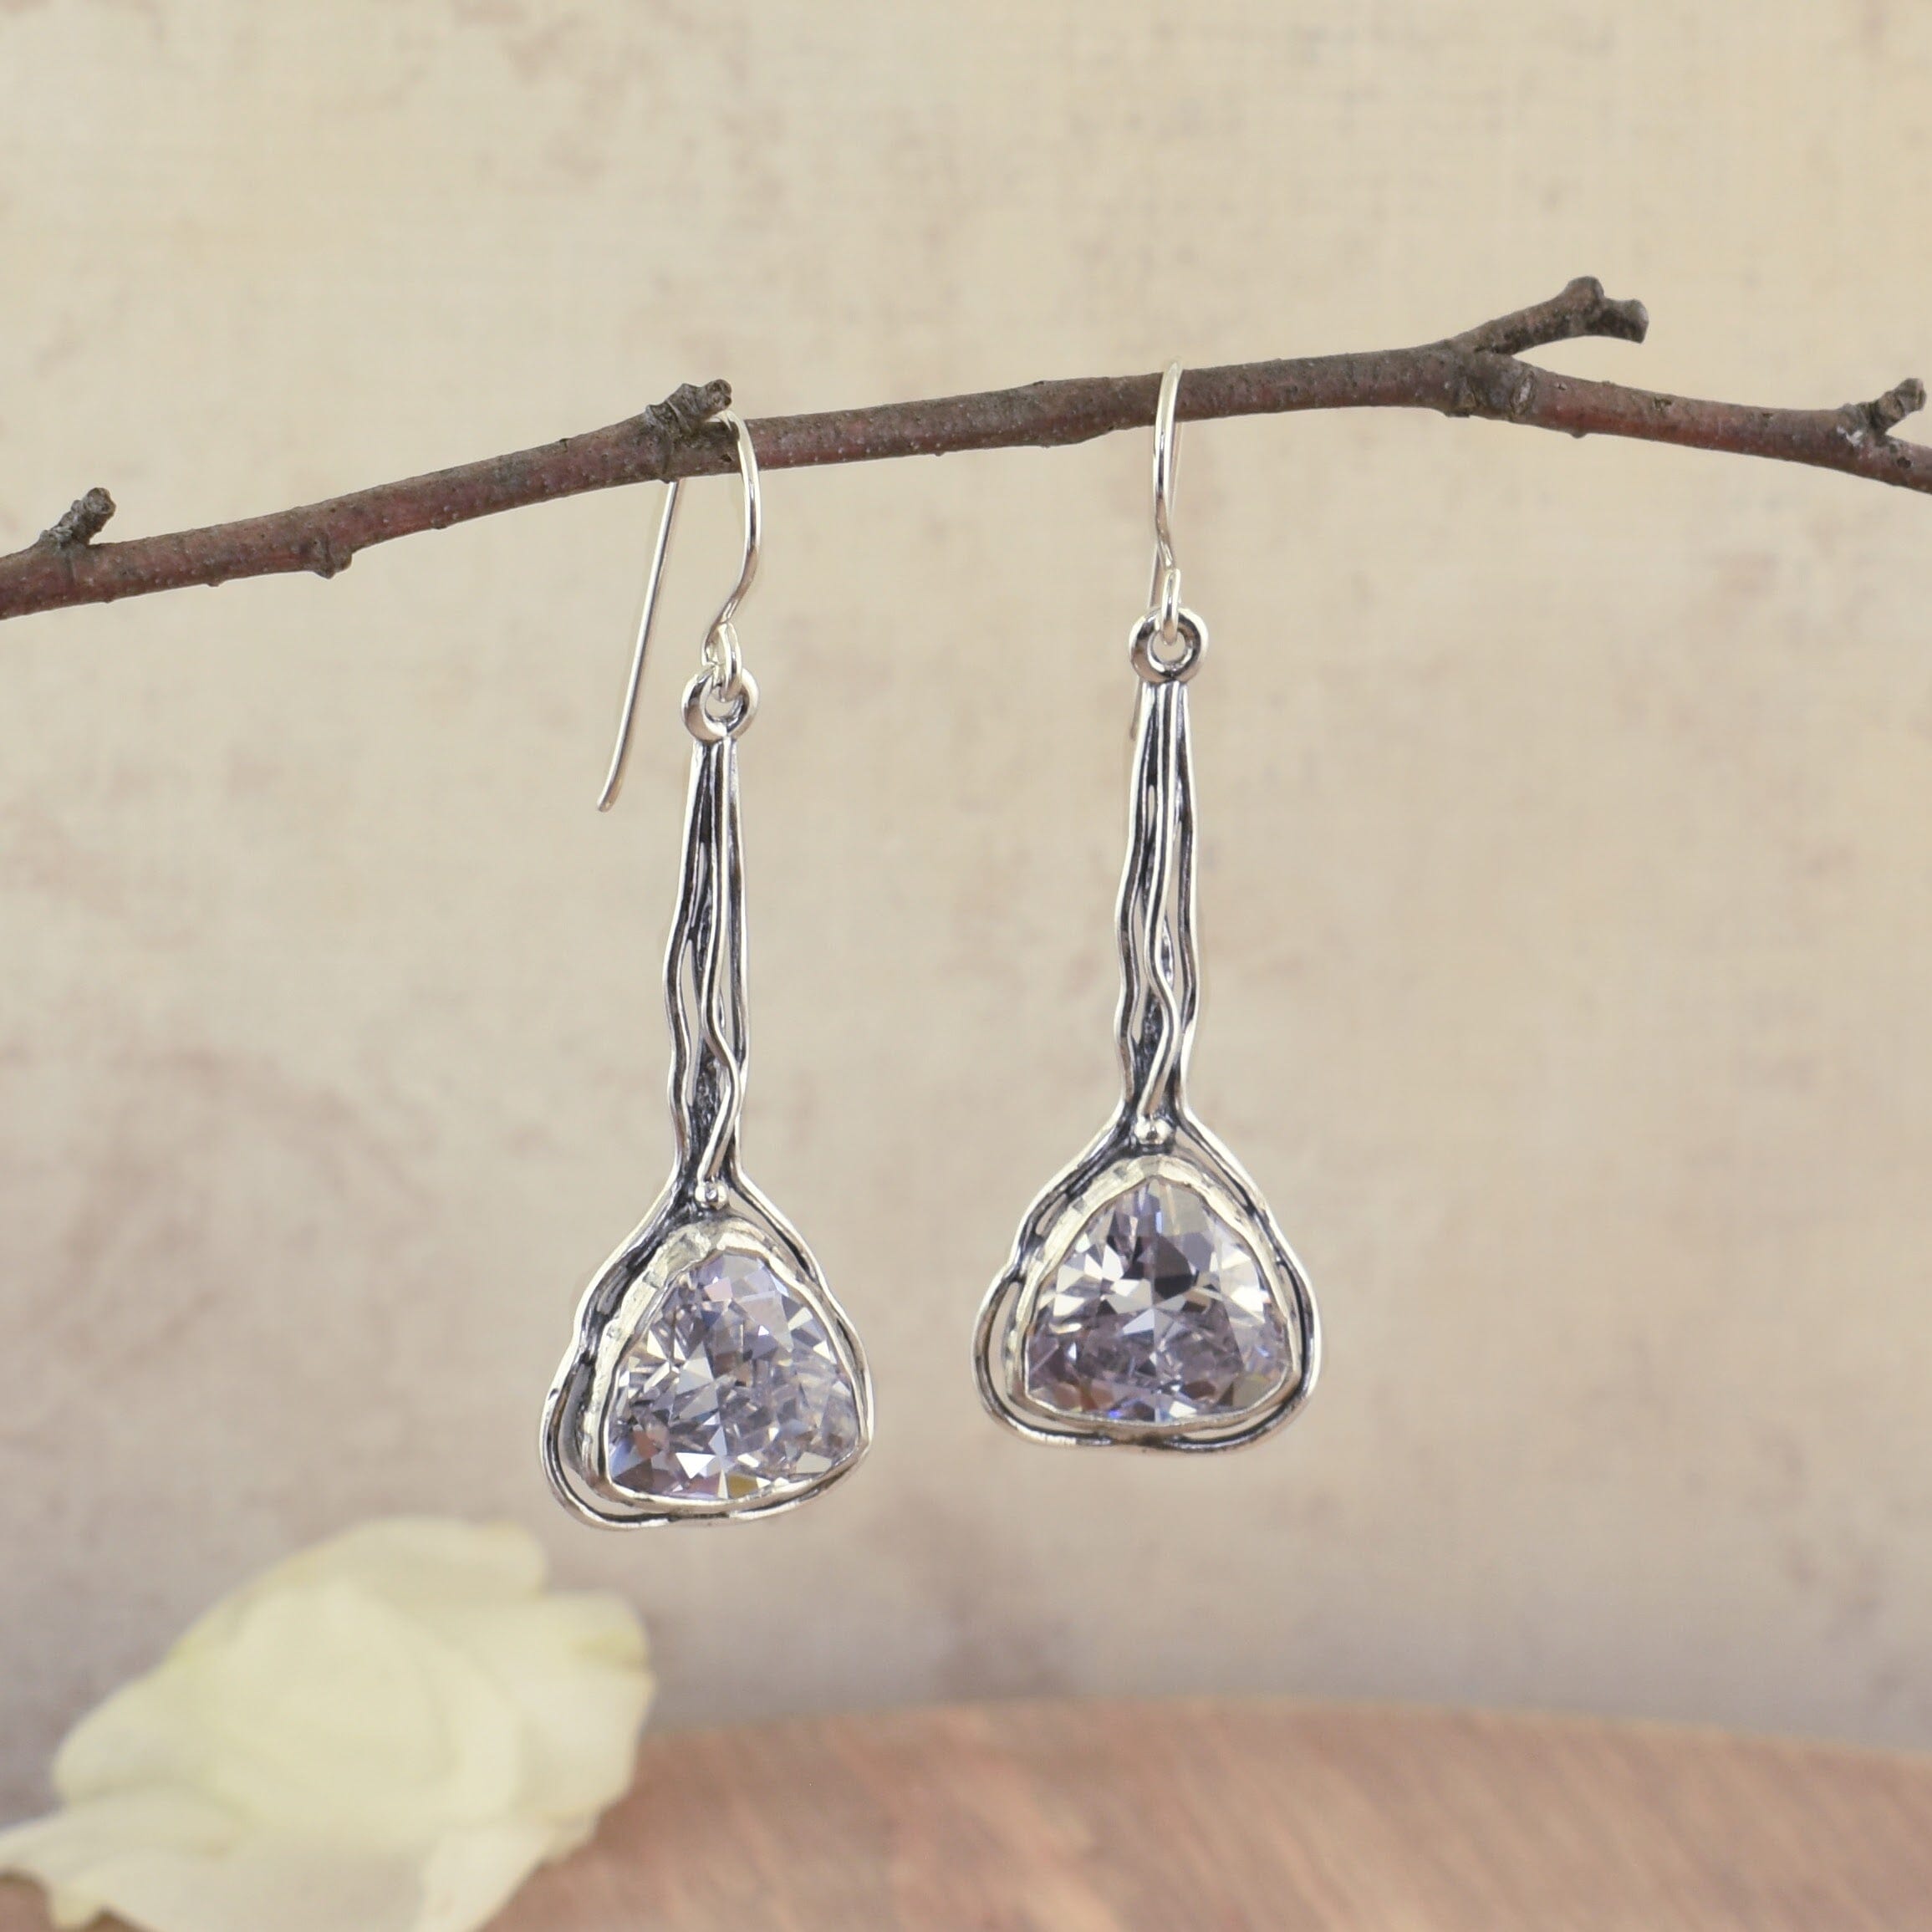 dangling sterling silver cz earrings - Made You Look